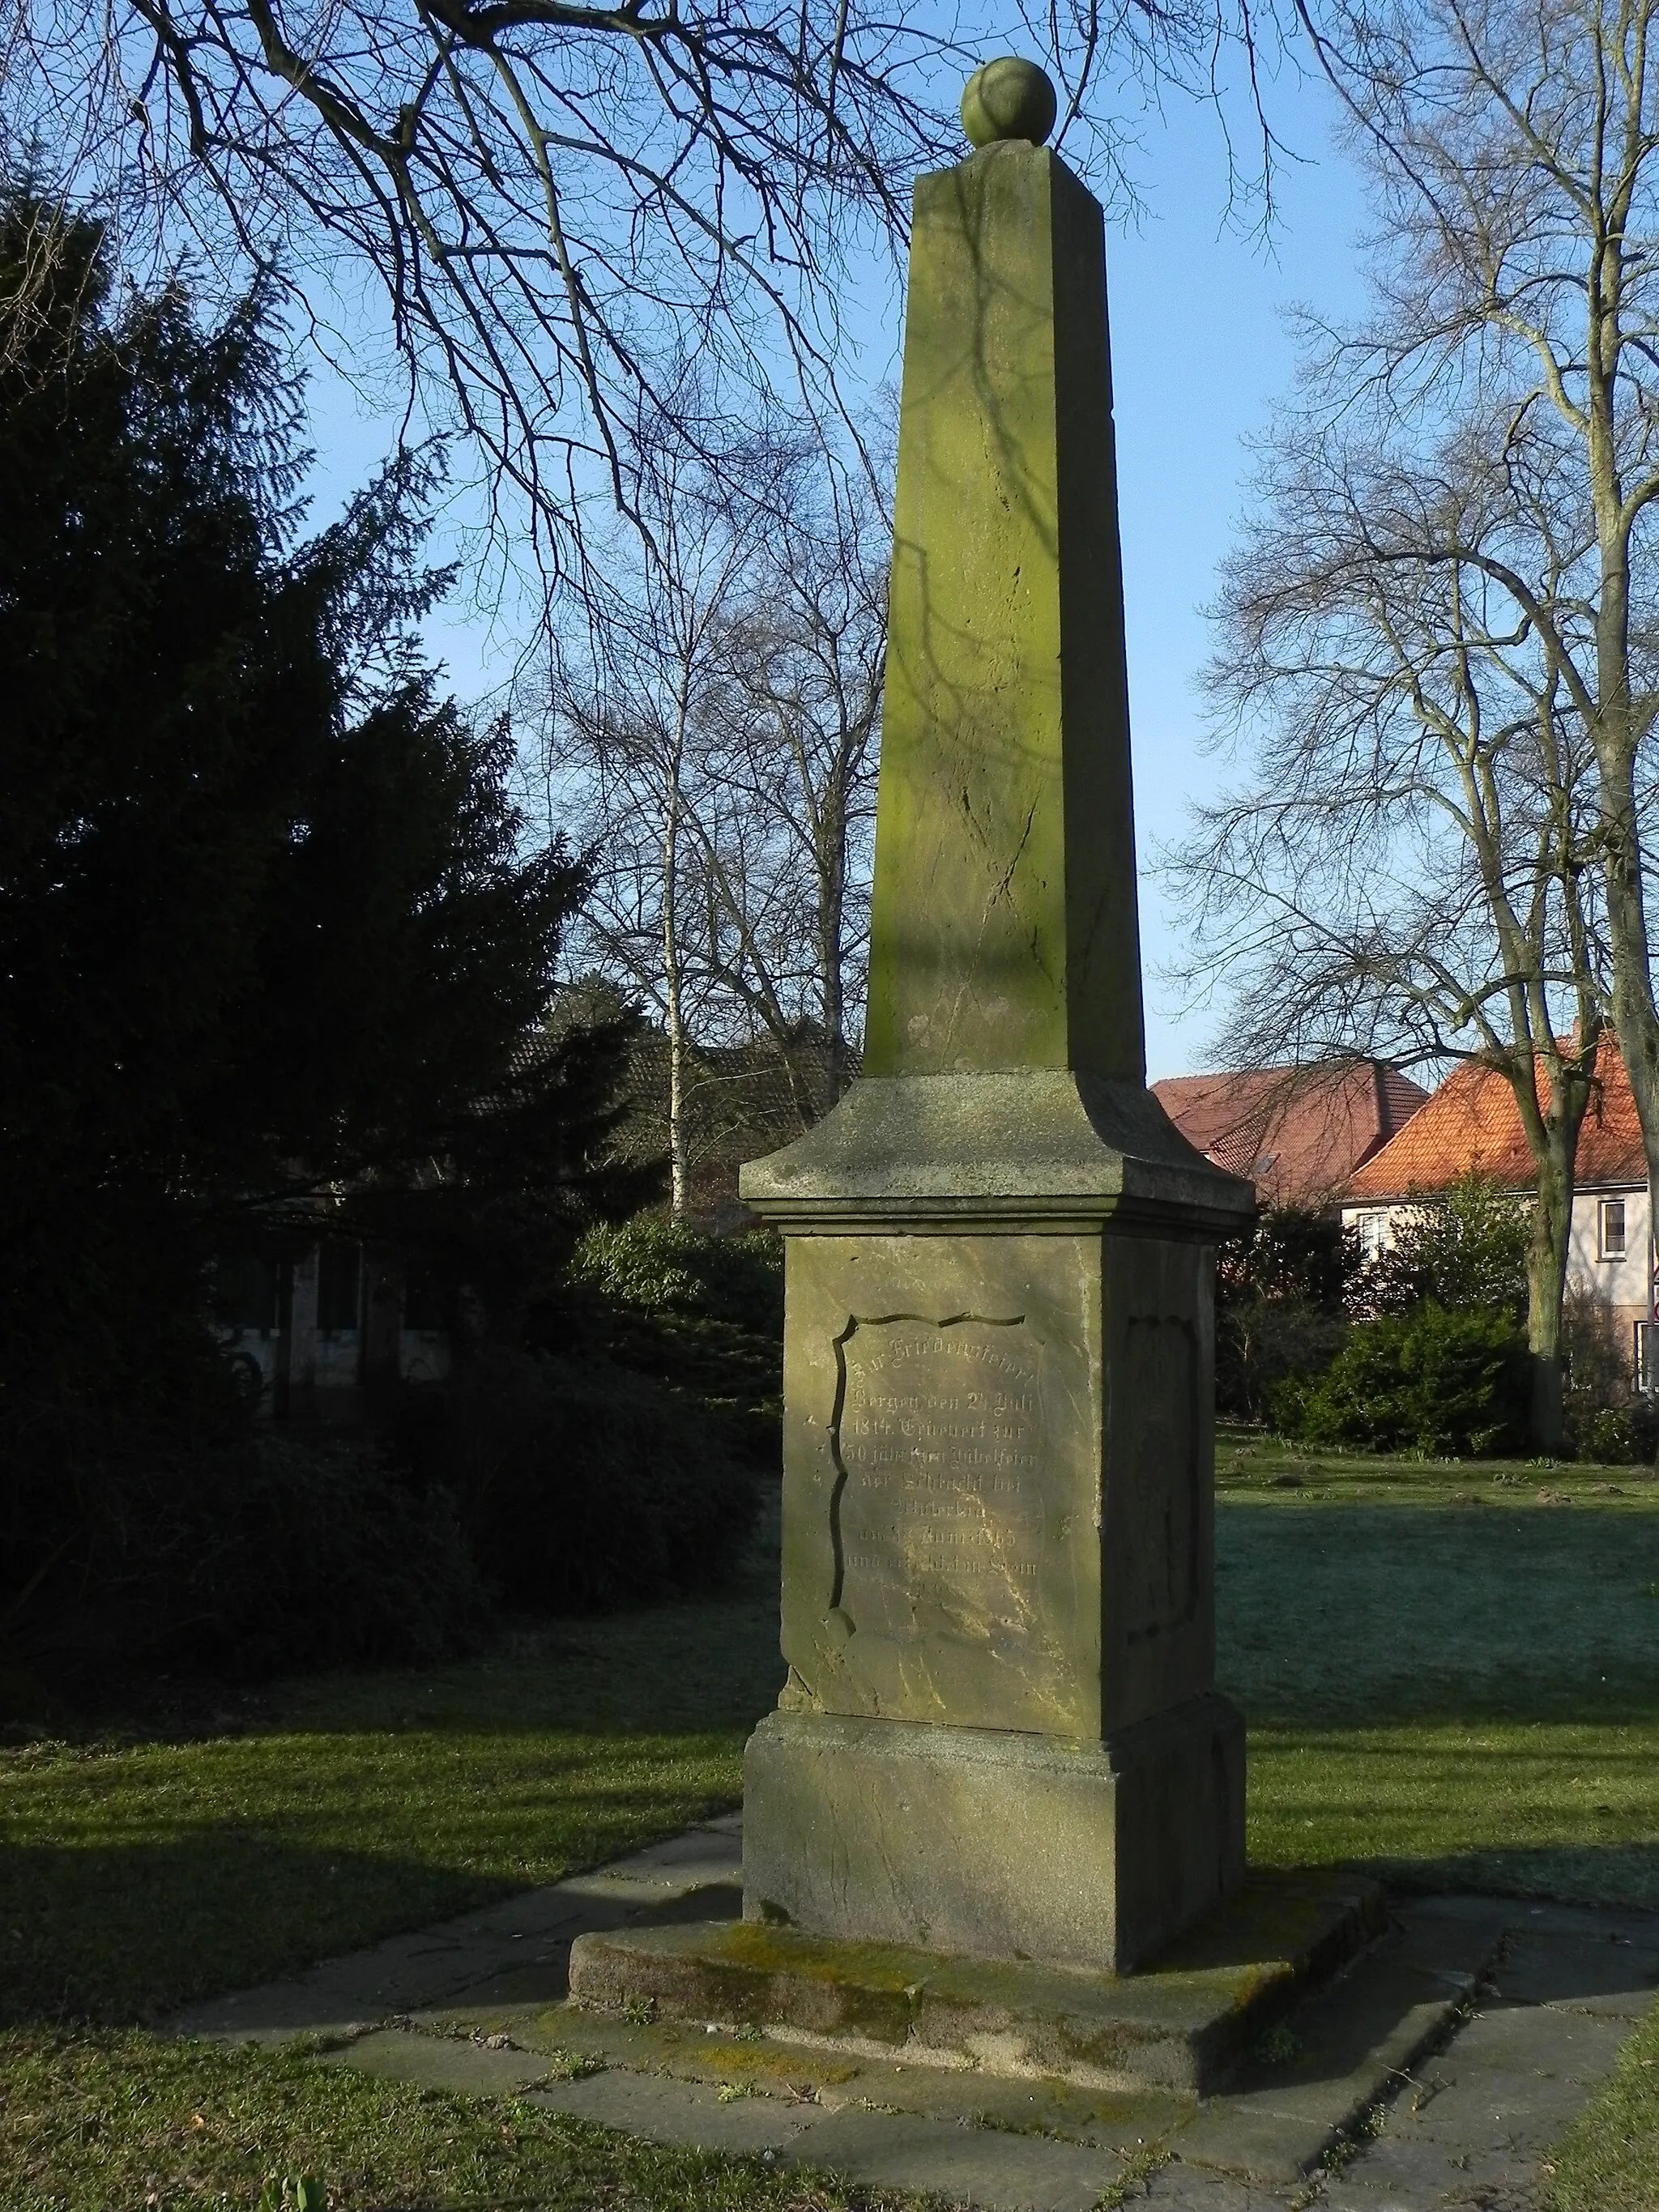 Photo showing: Monument marking the end of French rule and 50th anniversary of the Battle of Waterloo